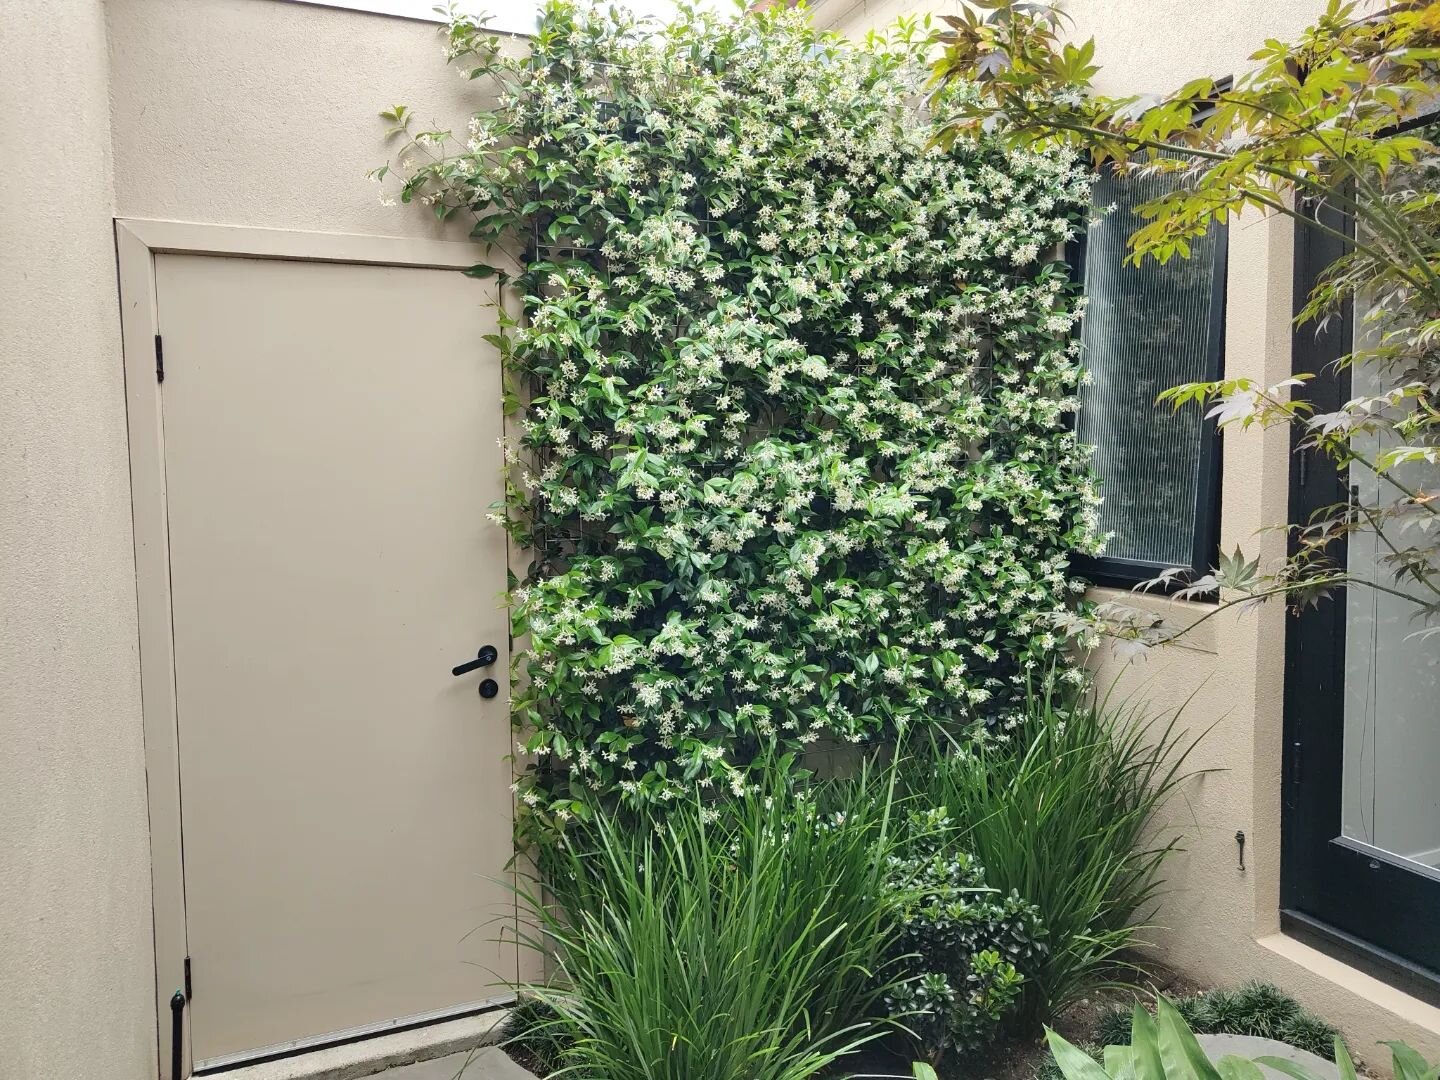 The Trachelospermum jasminoides blooms have been worth the wait this year!
(Swipe for a throwback Thursday to 12 months ago!)

Looking for a quote? Contact us today!
✉️natural_harmony@bigpond.com
📞 0419 722 745

#beforeandafter #trachelospermumjasmi